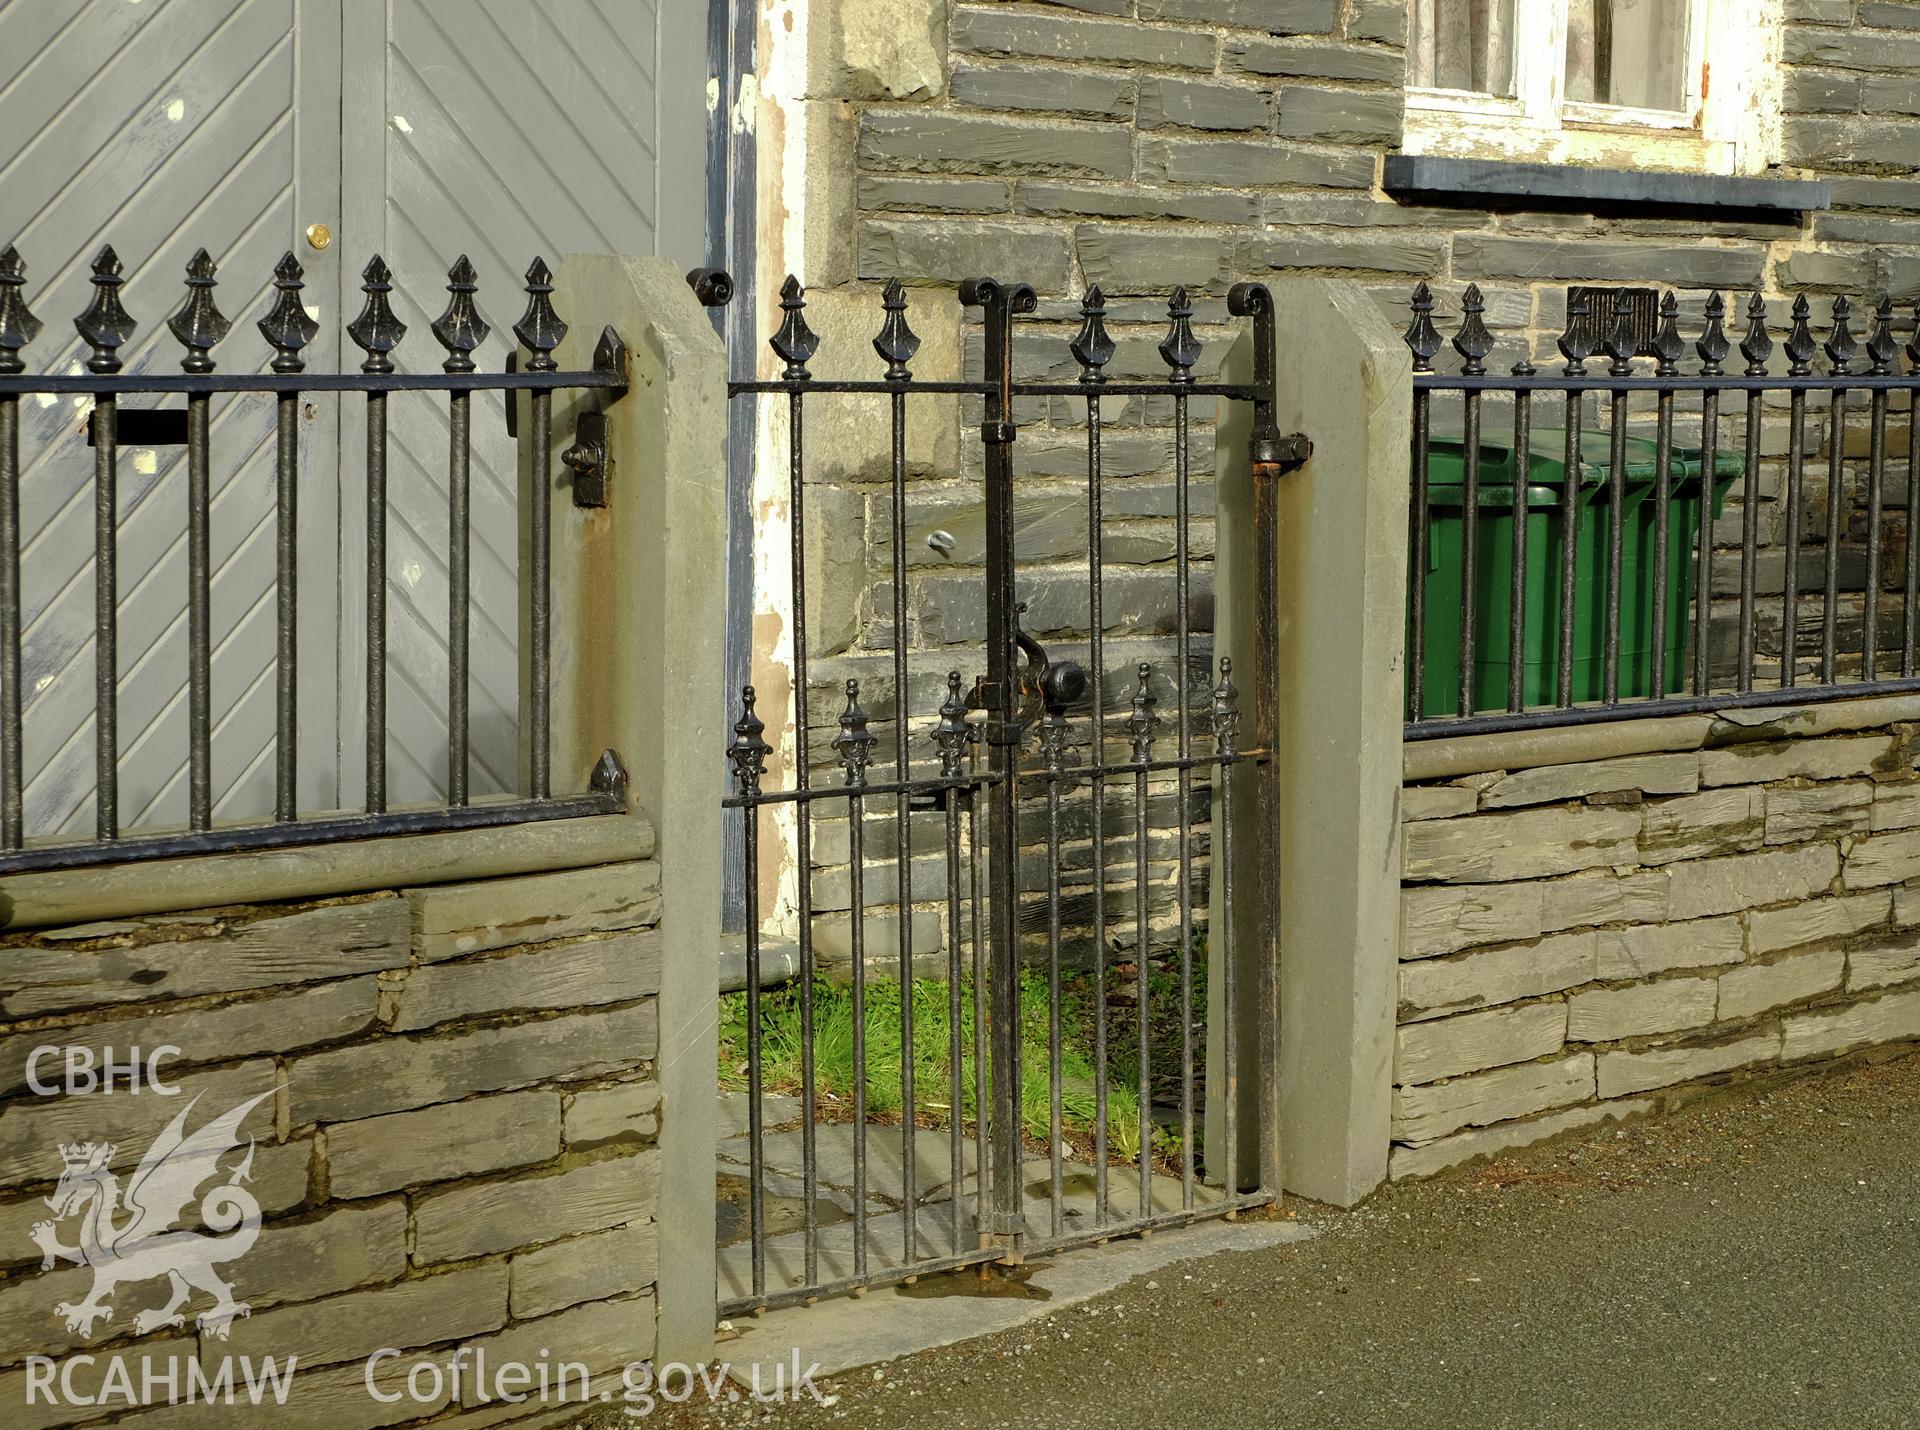 Colour photograph showing a view of Capel Saron, Abergynolwyn's forecourt wall and gates to street, produced by Richard Hayman 7th February 2017